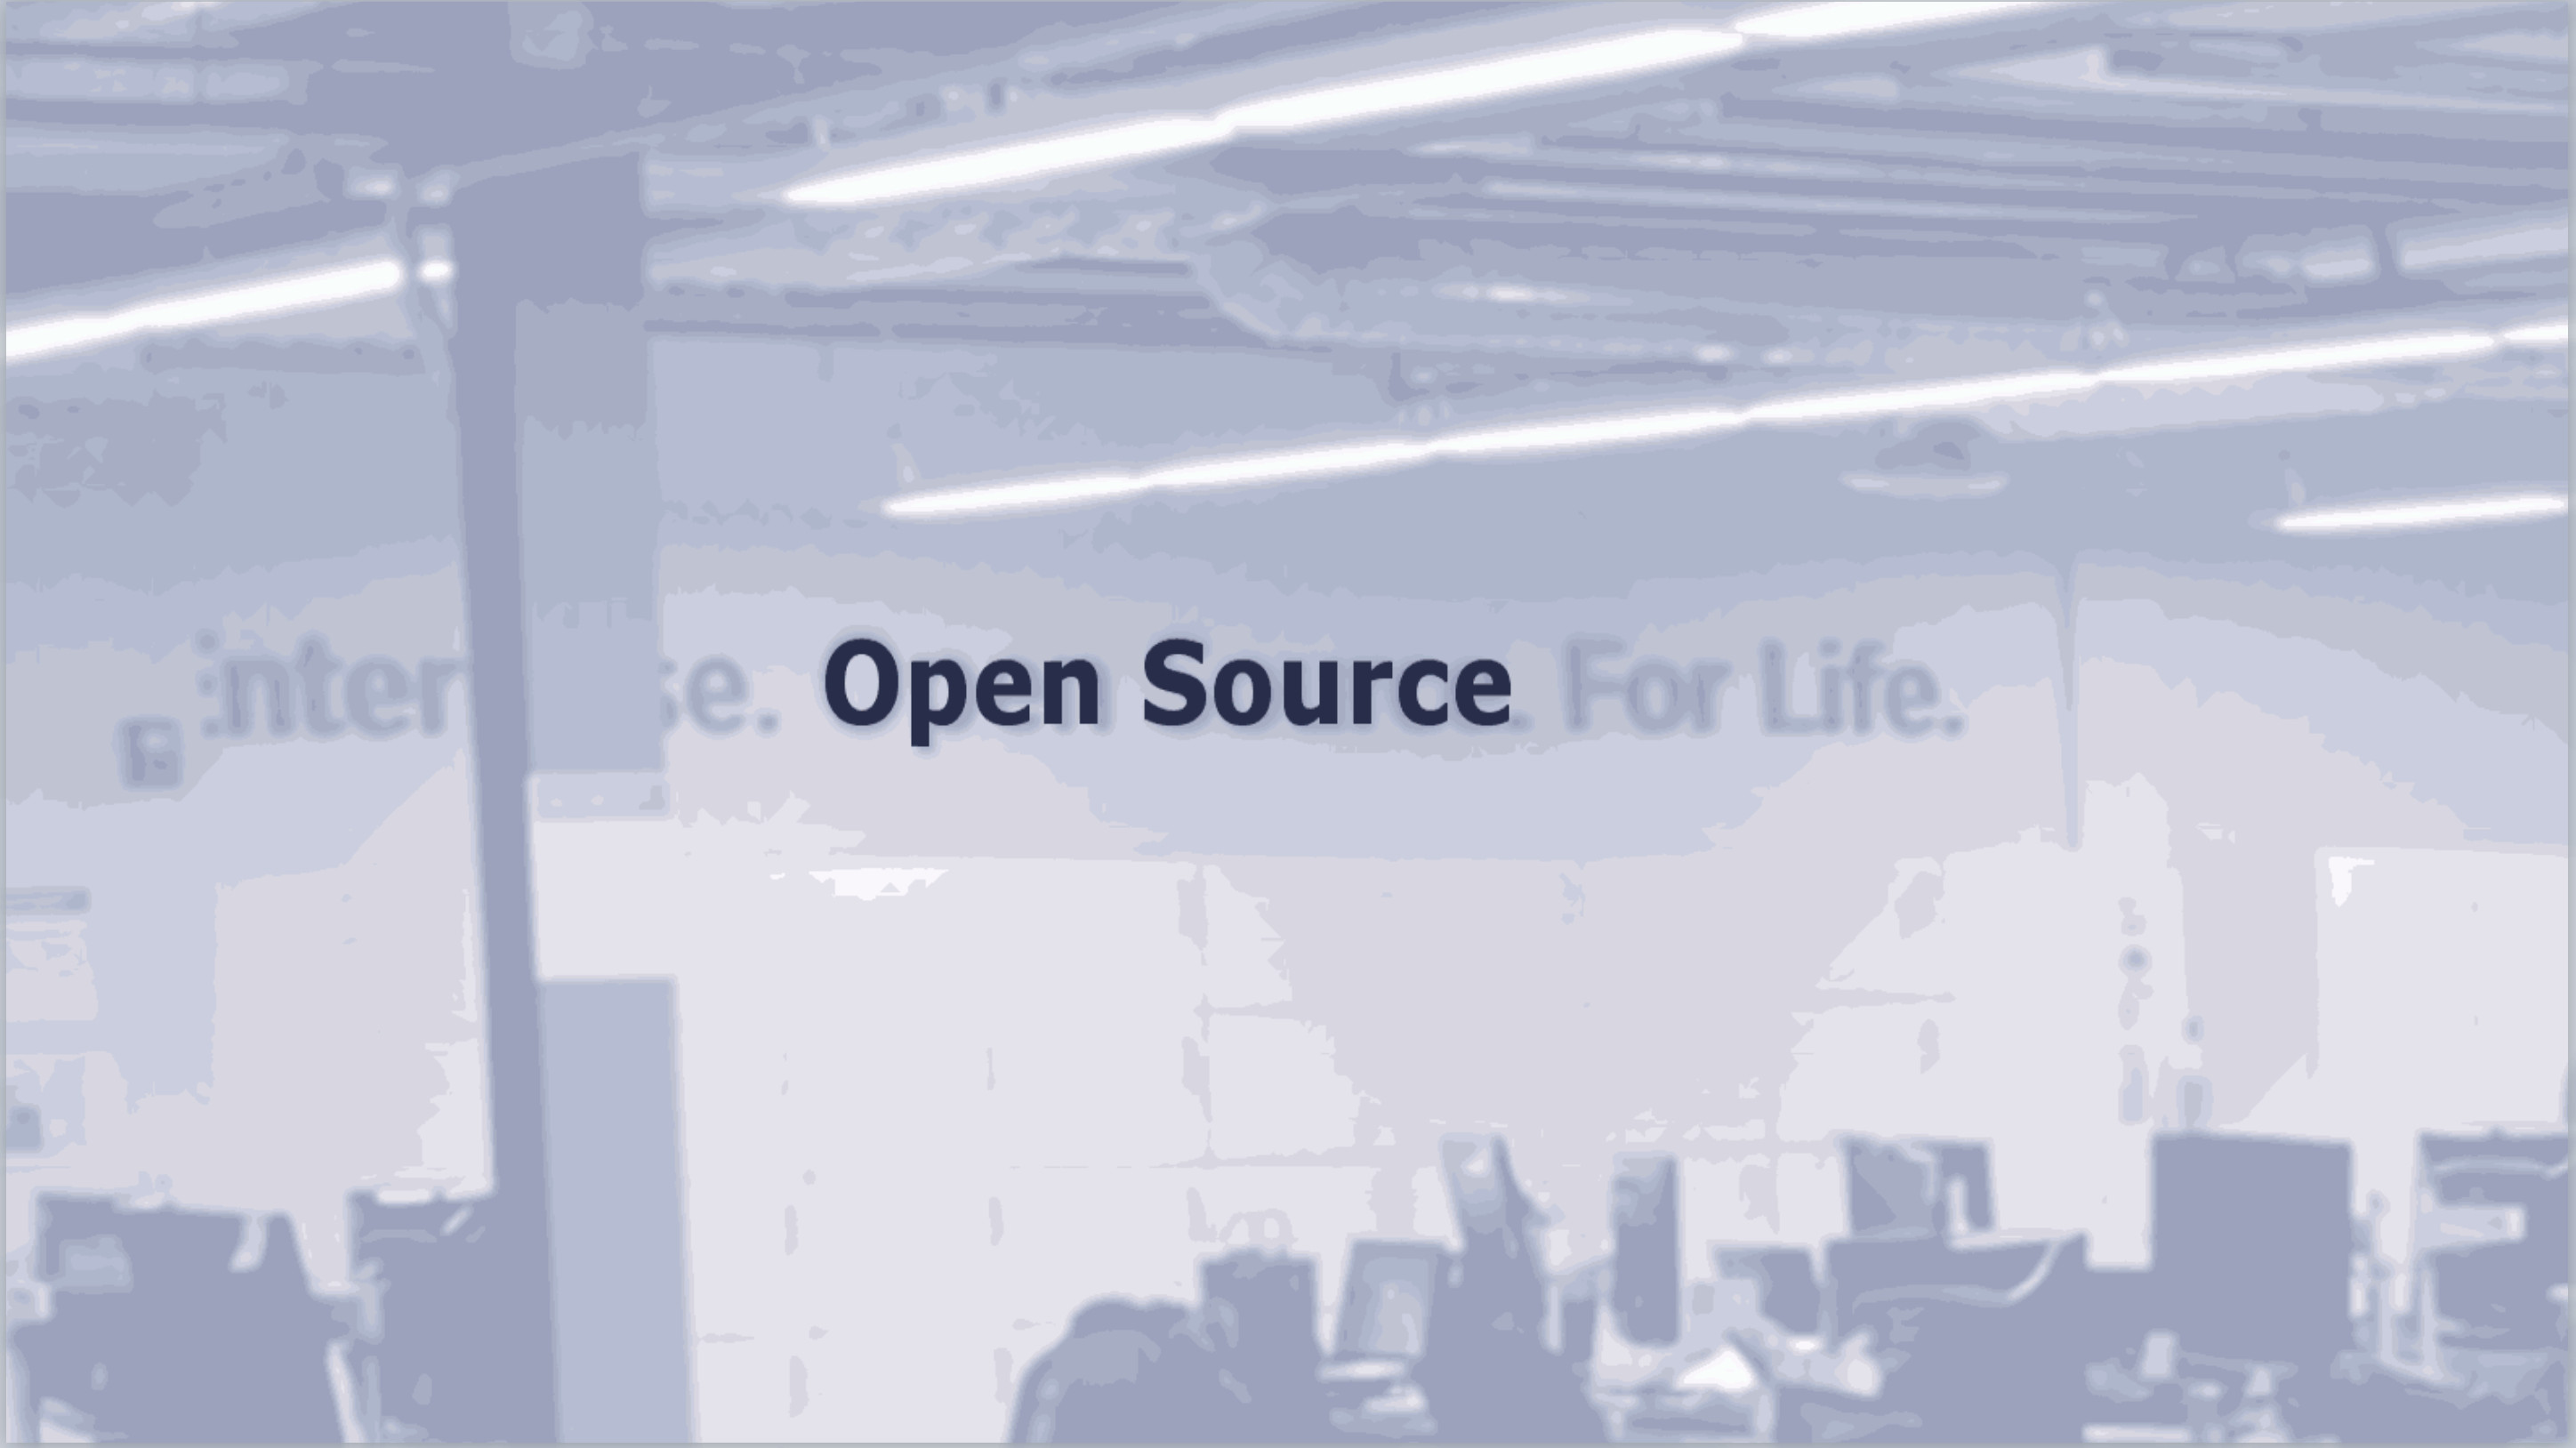 Picture of Liferay's office with “Open Source“ sign highlighted